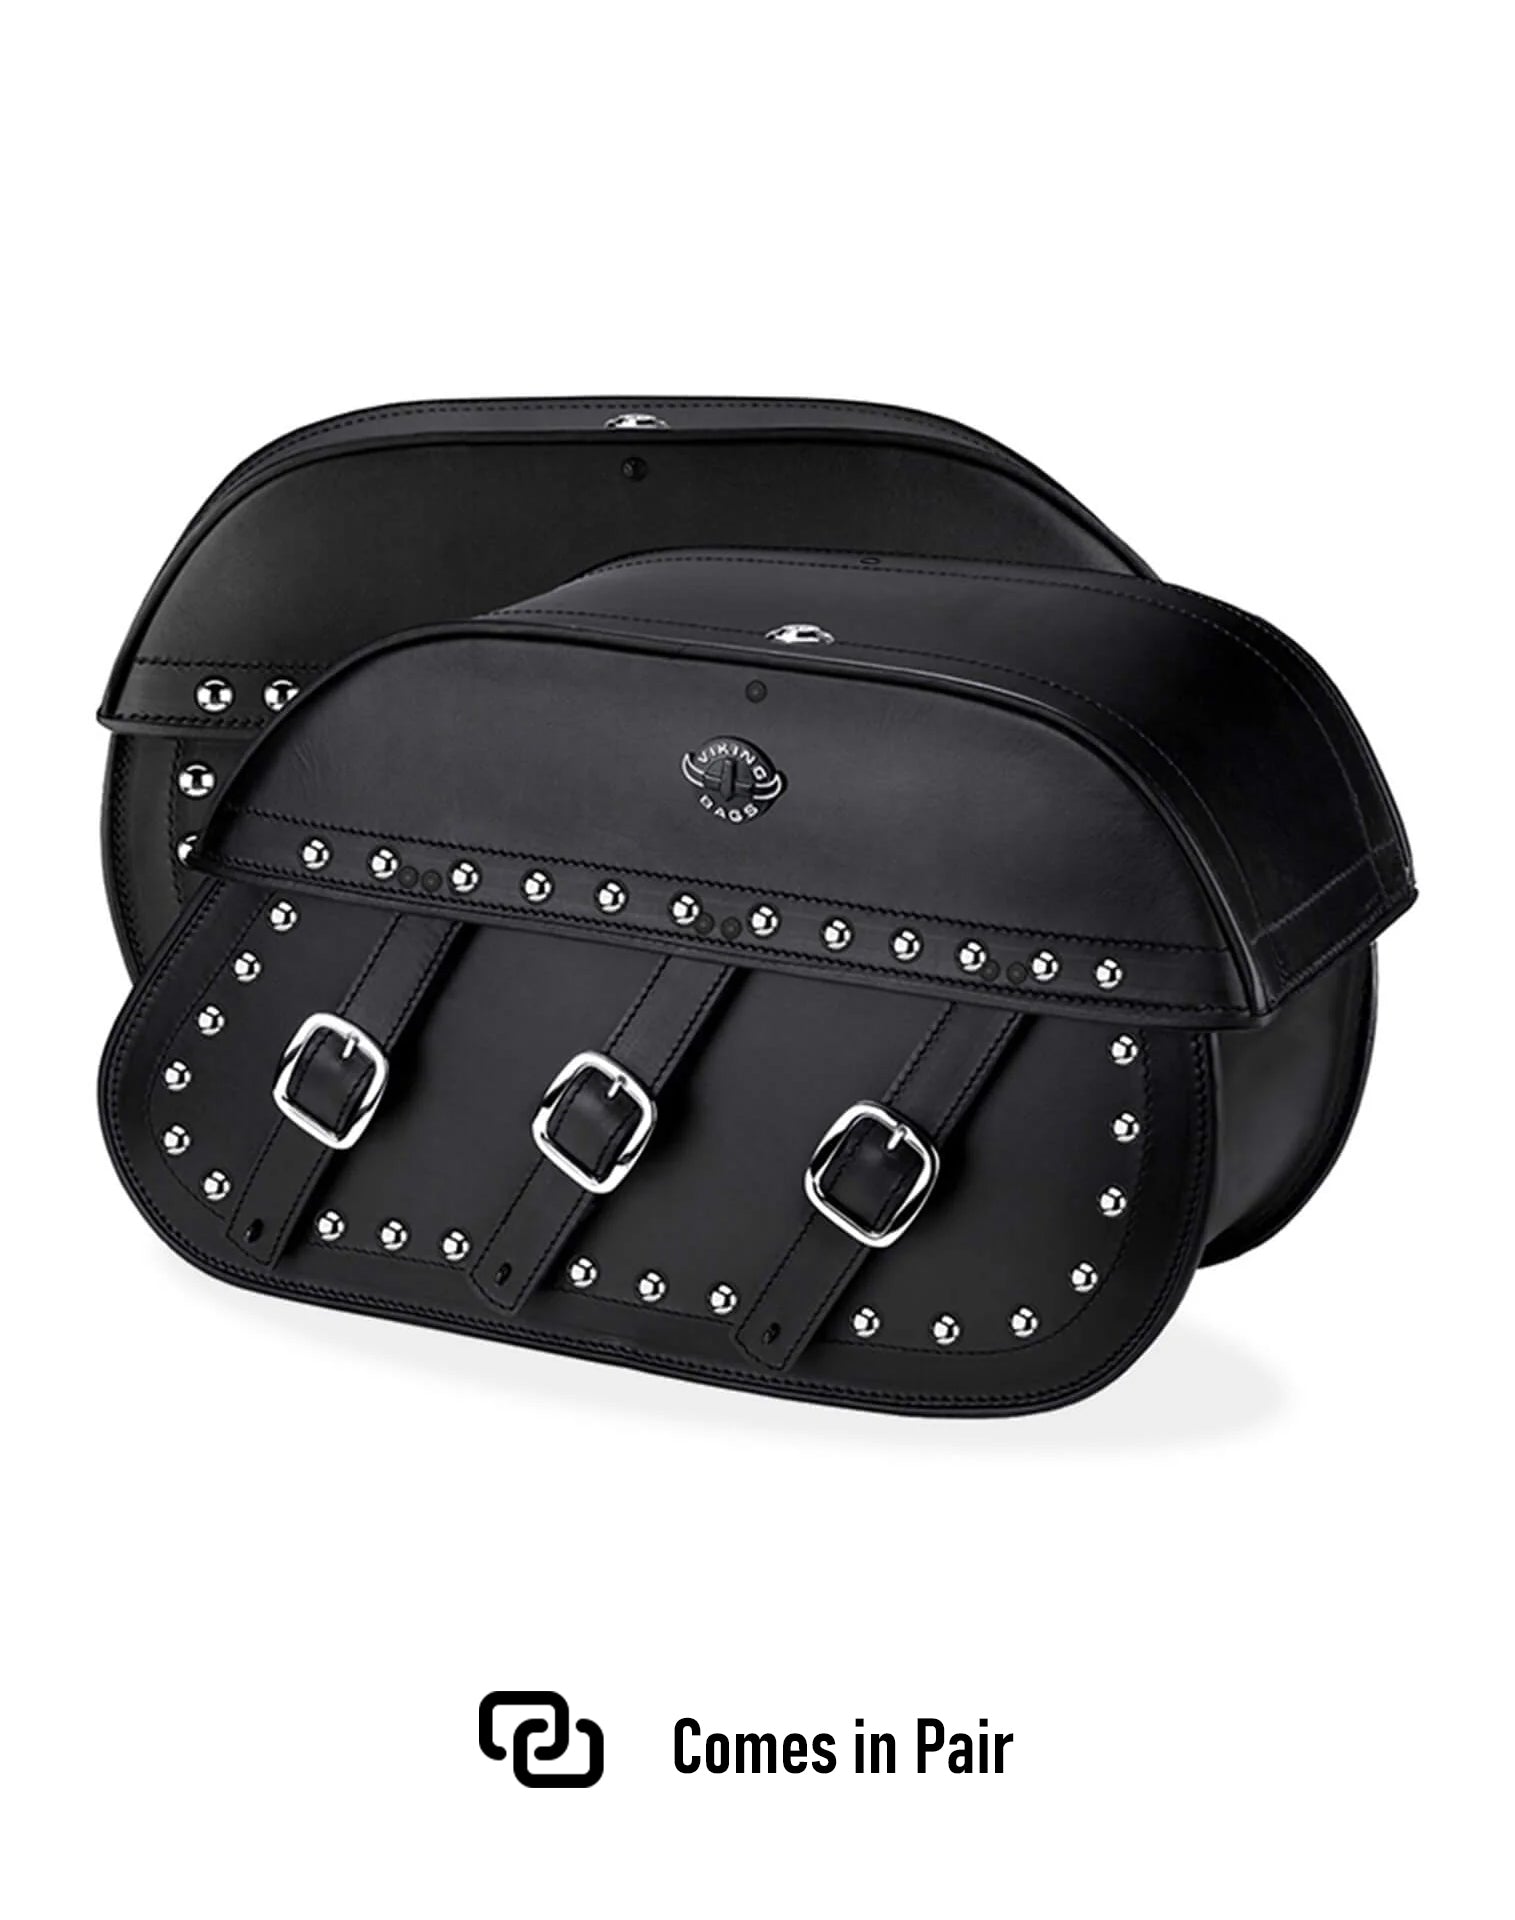 Viking Trianon Extra Large Yamaha V Star 950 Studded Leather Motorcycle Saddlebags Weather Resistant Bags Comes in Pair